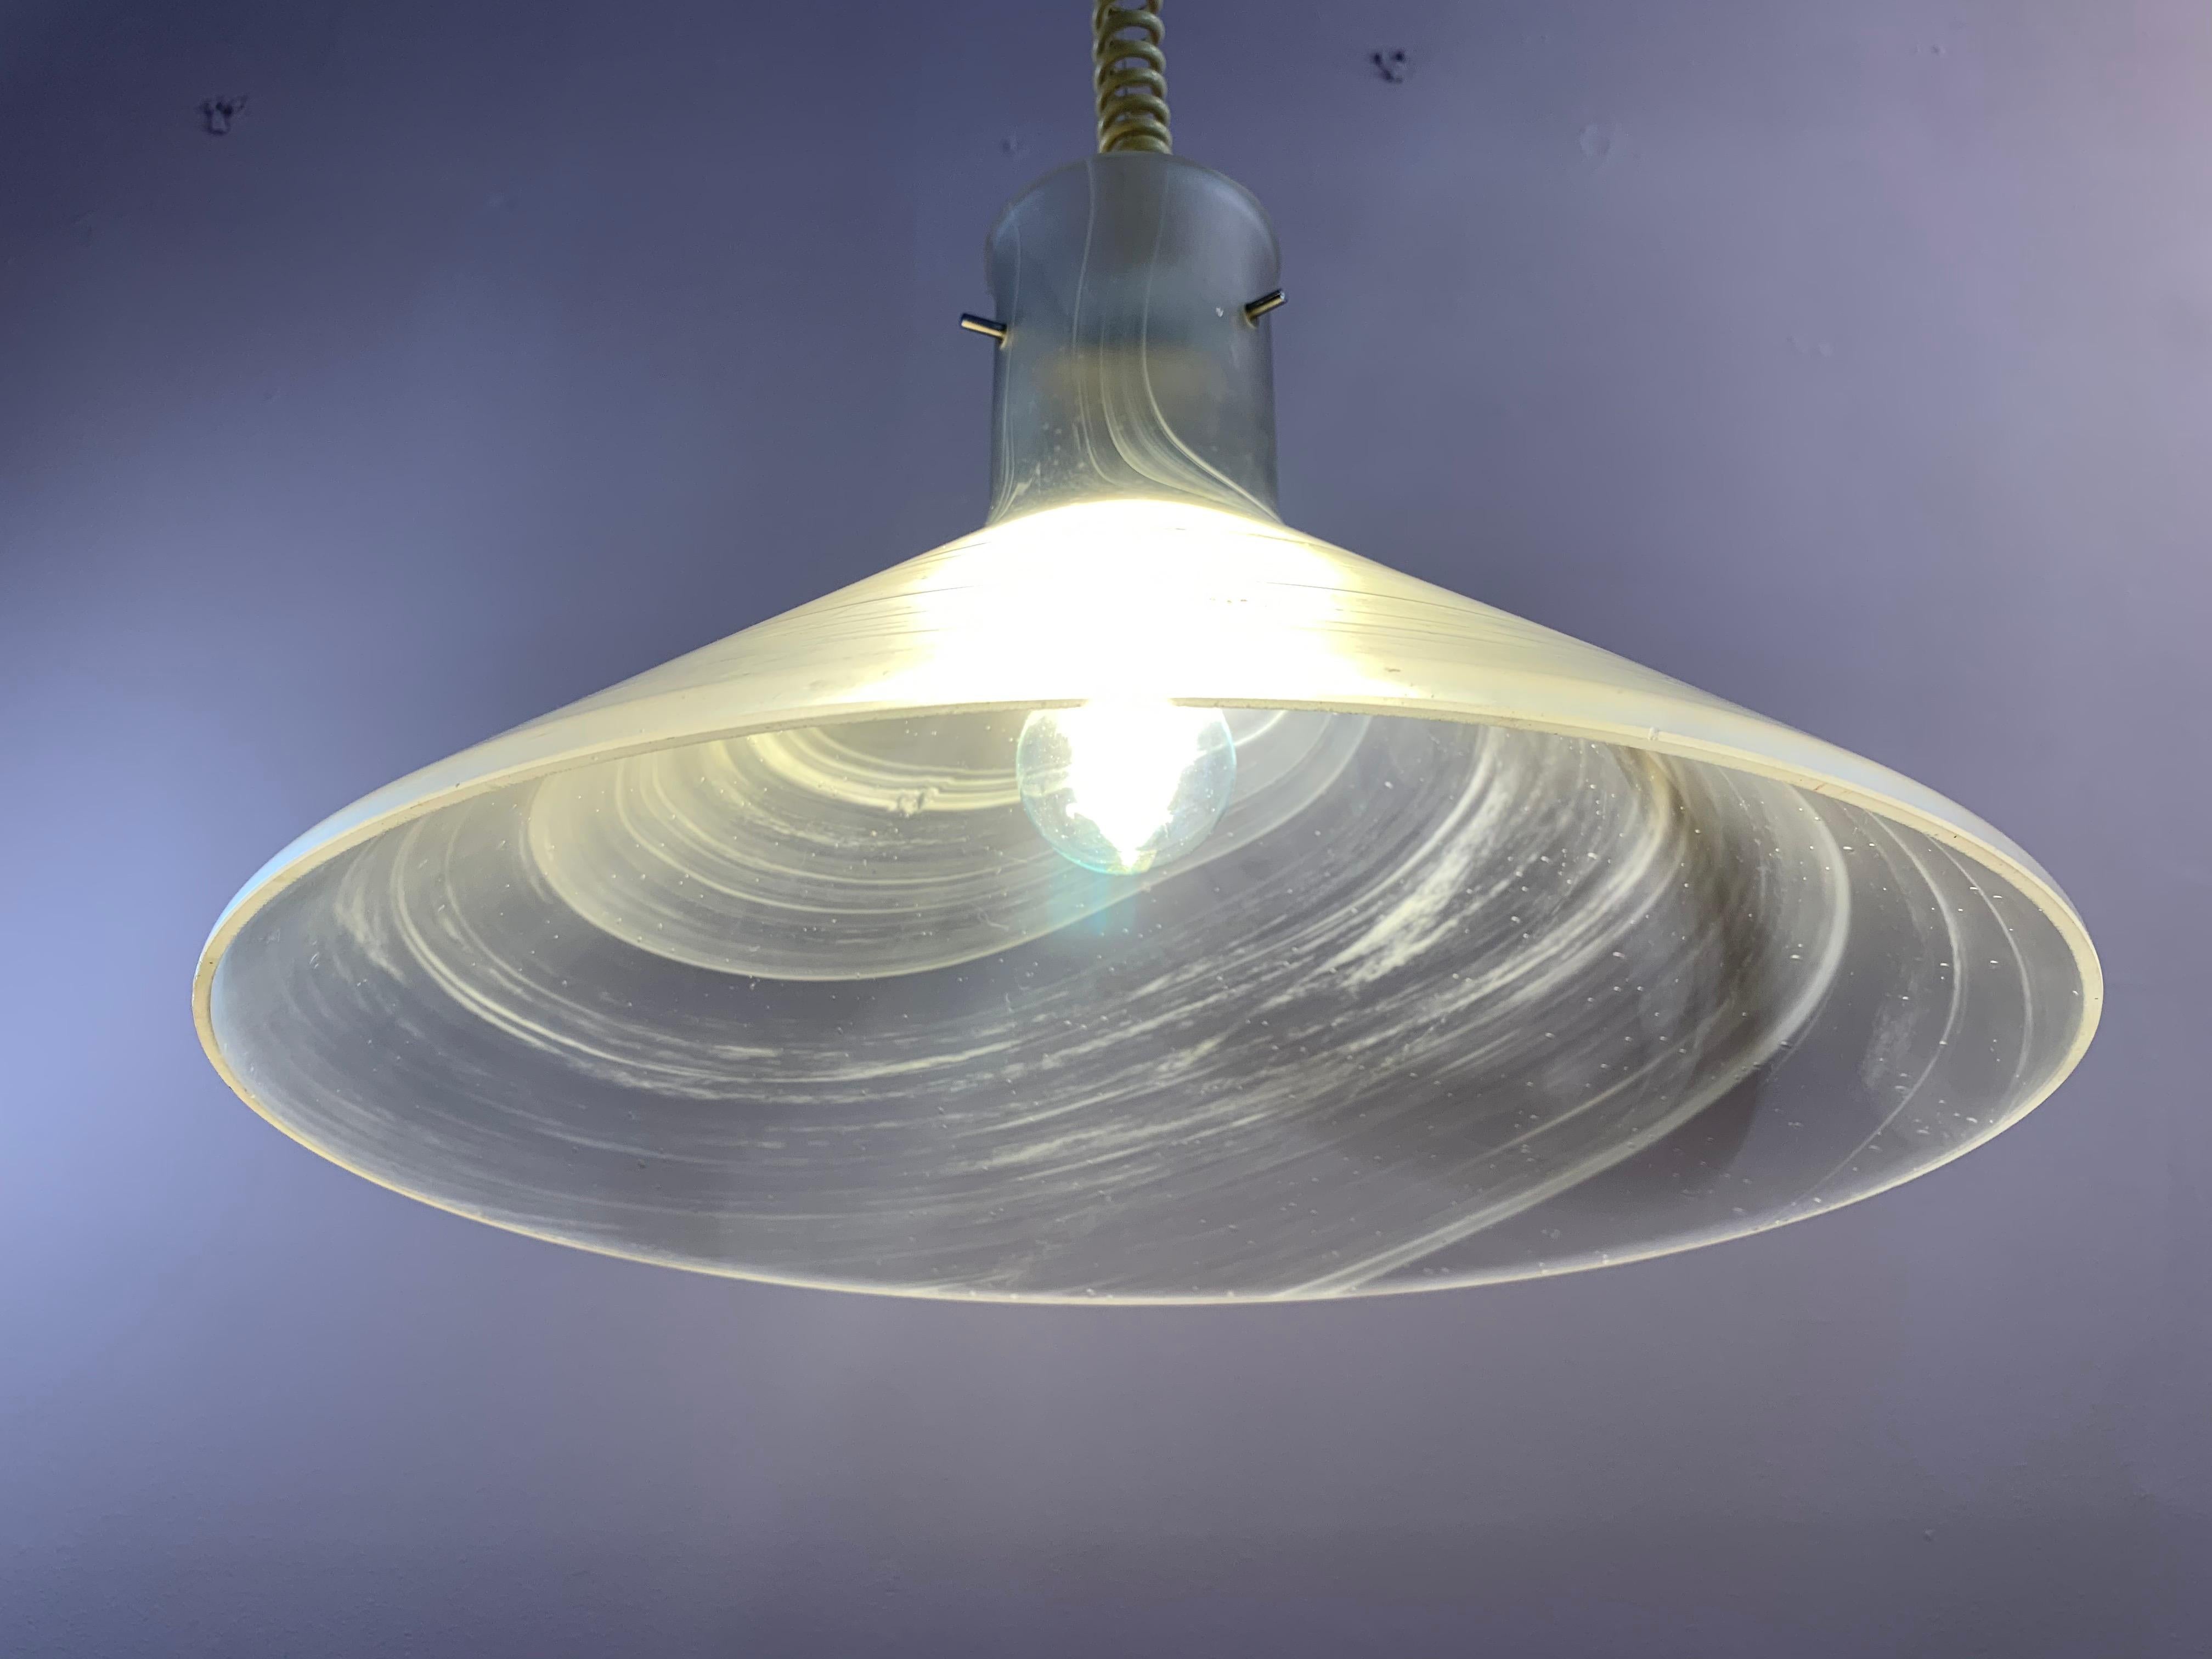 1970s, German, Peill & Putzler, conical, opaque glass, ceiling hanging light. The shade is made from thick glass with an opaque, circular, whirlpool effect pattern around the outside with some small feature bubbles throughout. The height is